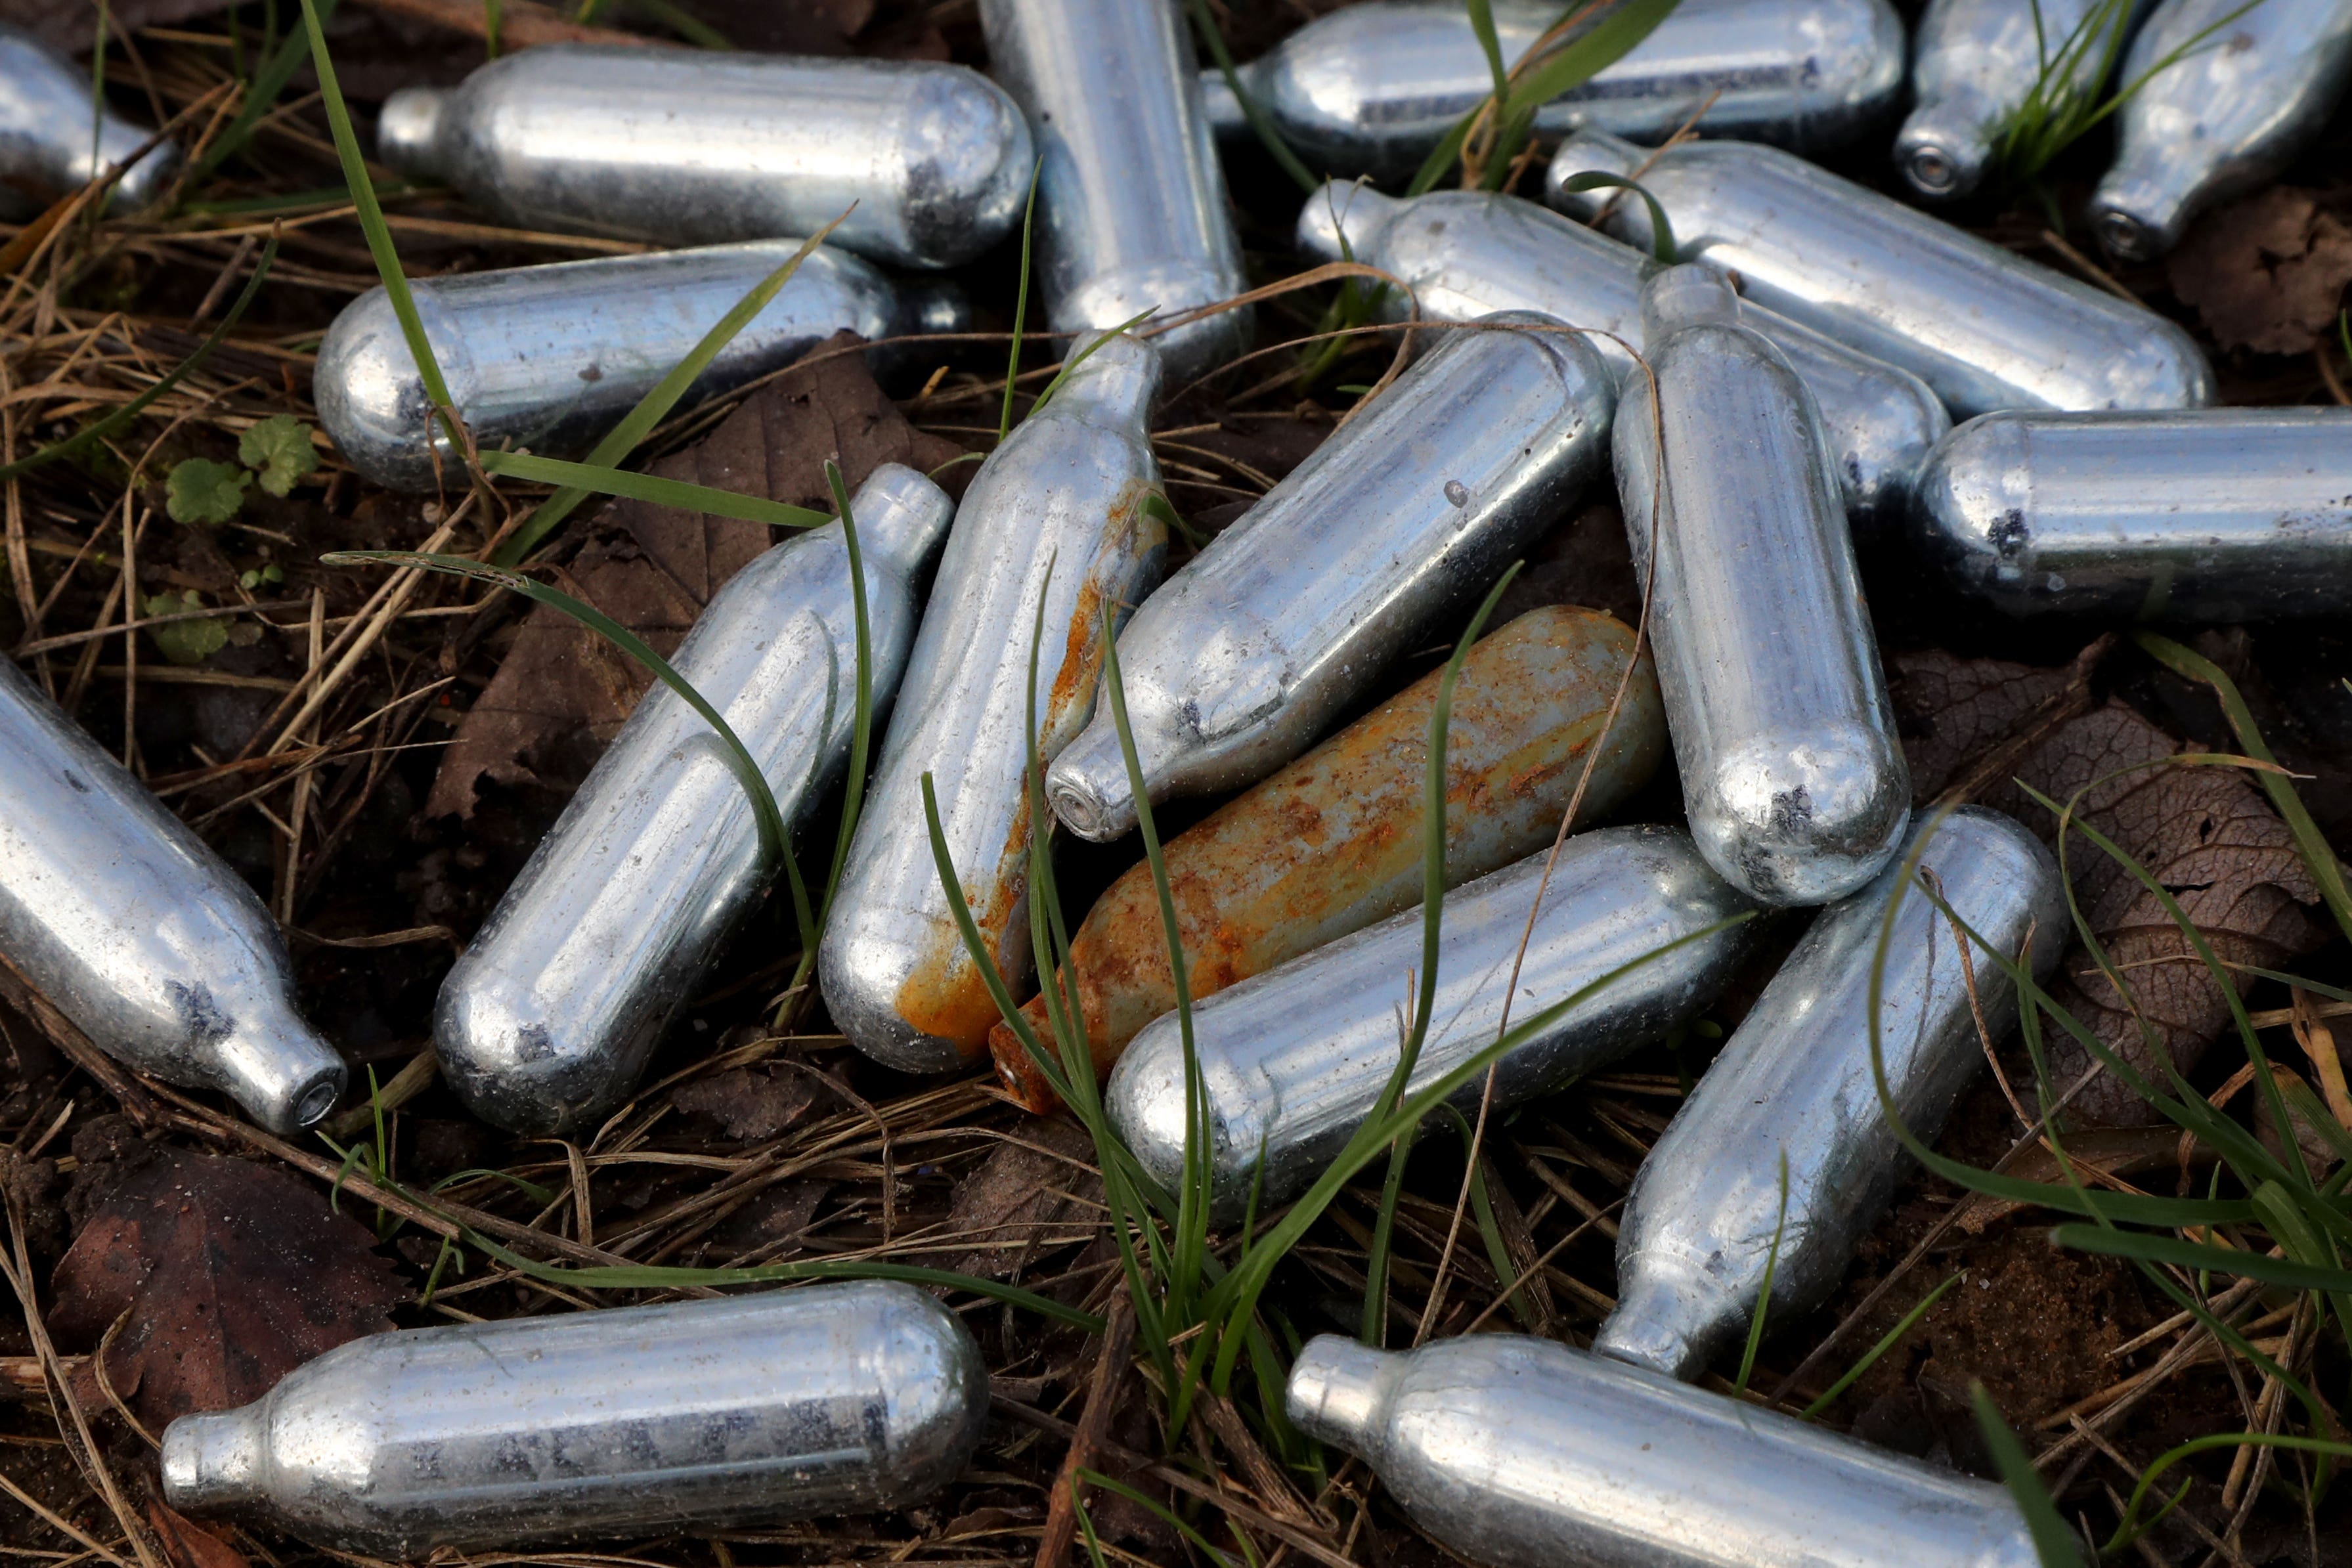 Laughing gas will be banned as part of the UK Government’s anti-social clampdown (Gareth Fuller/PA)